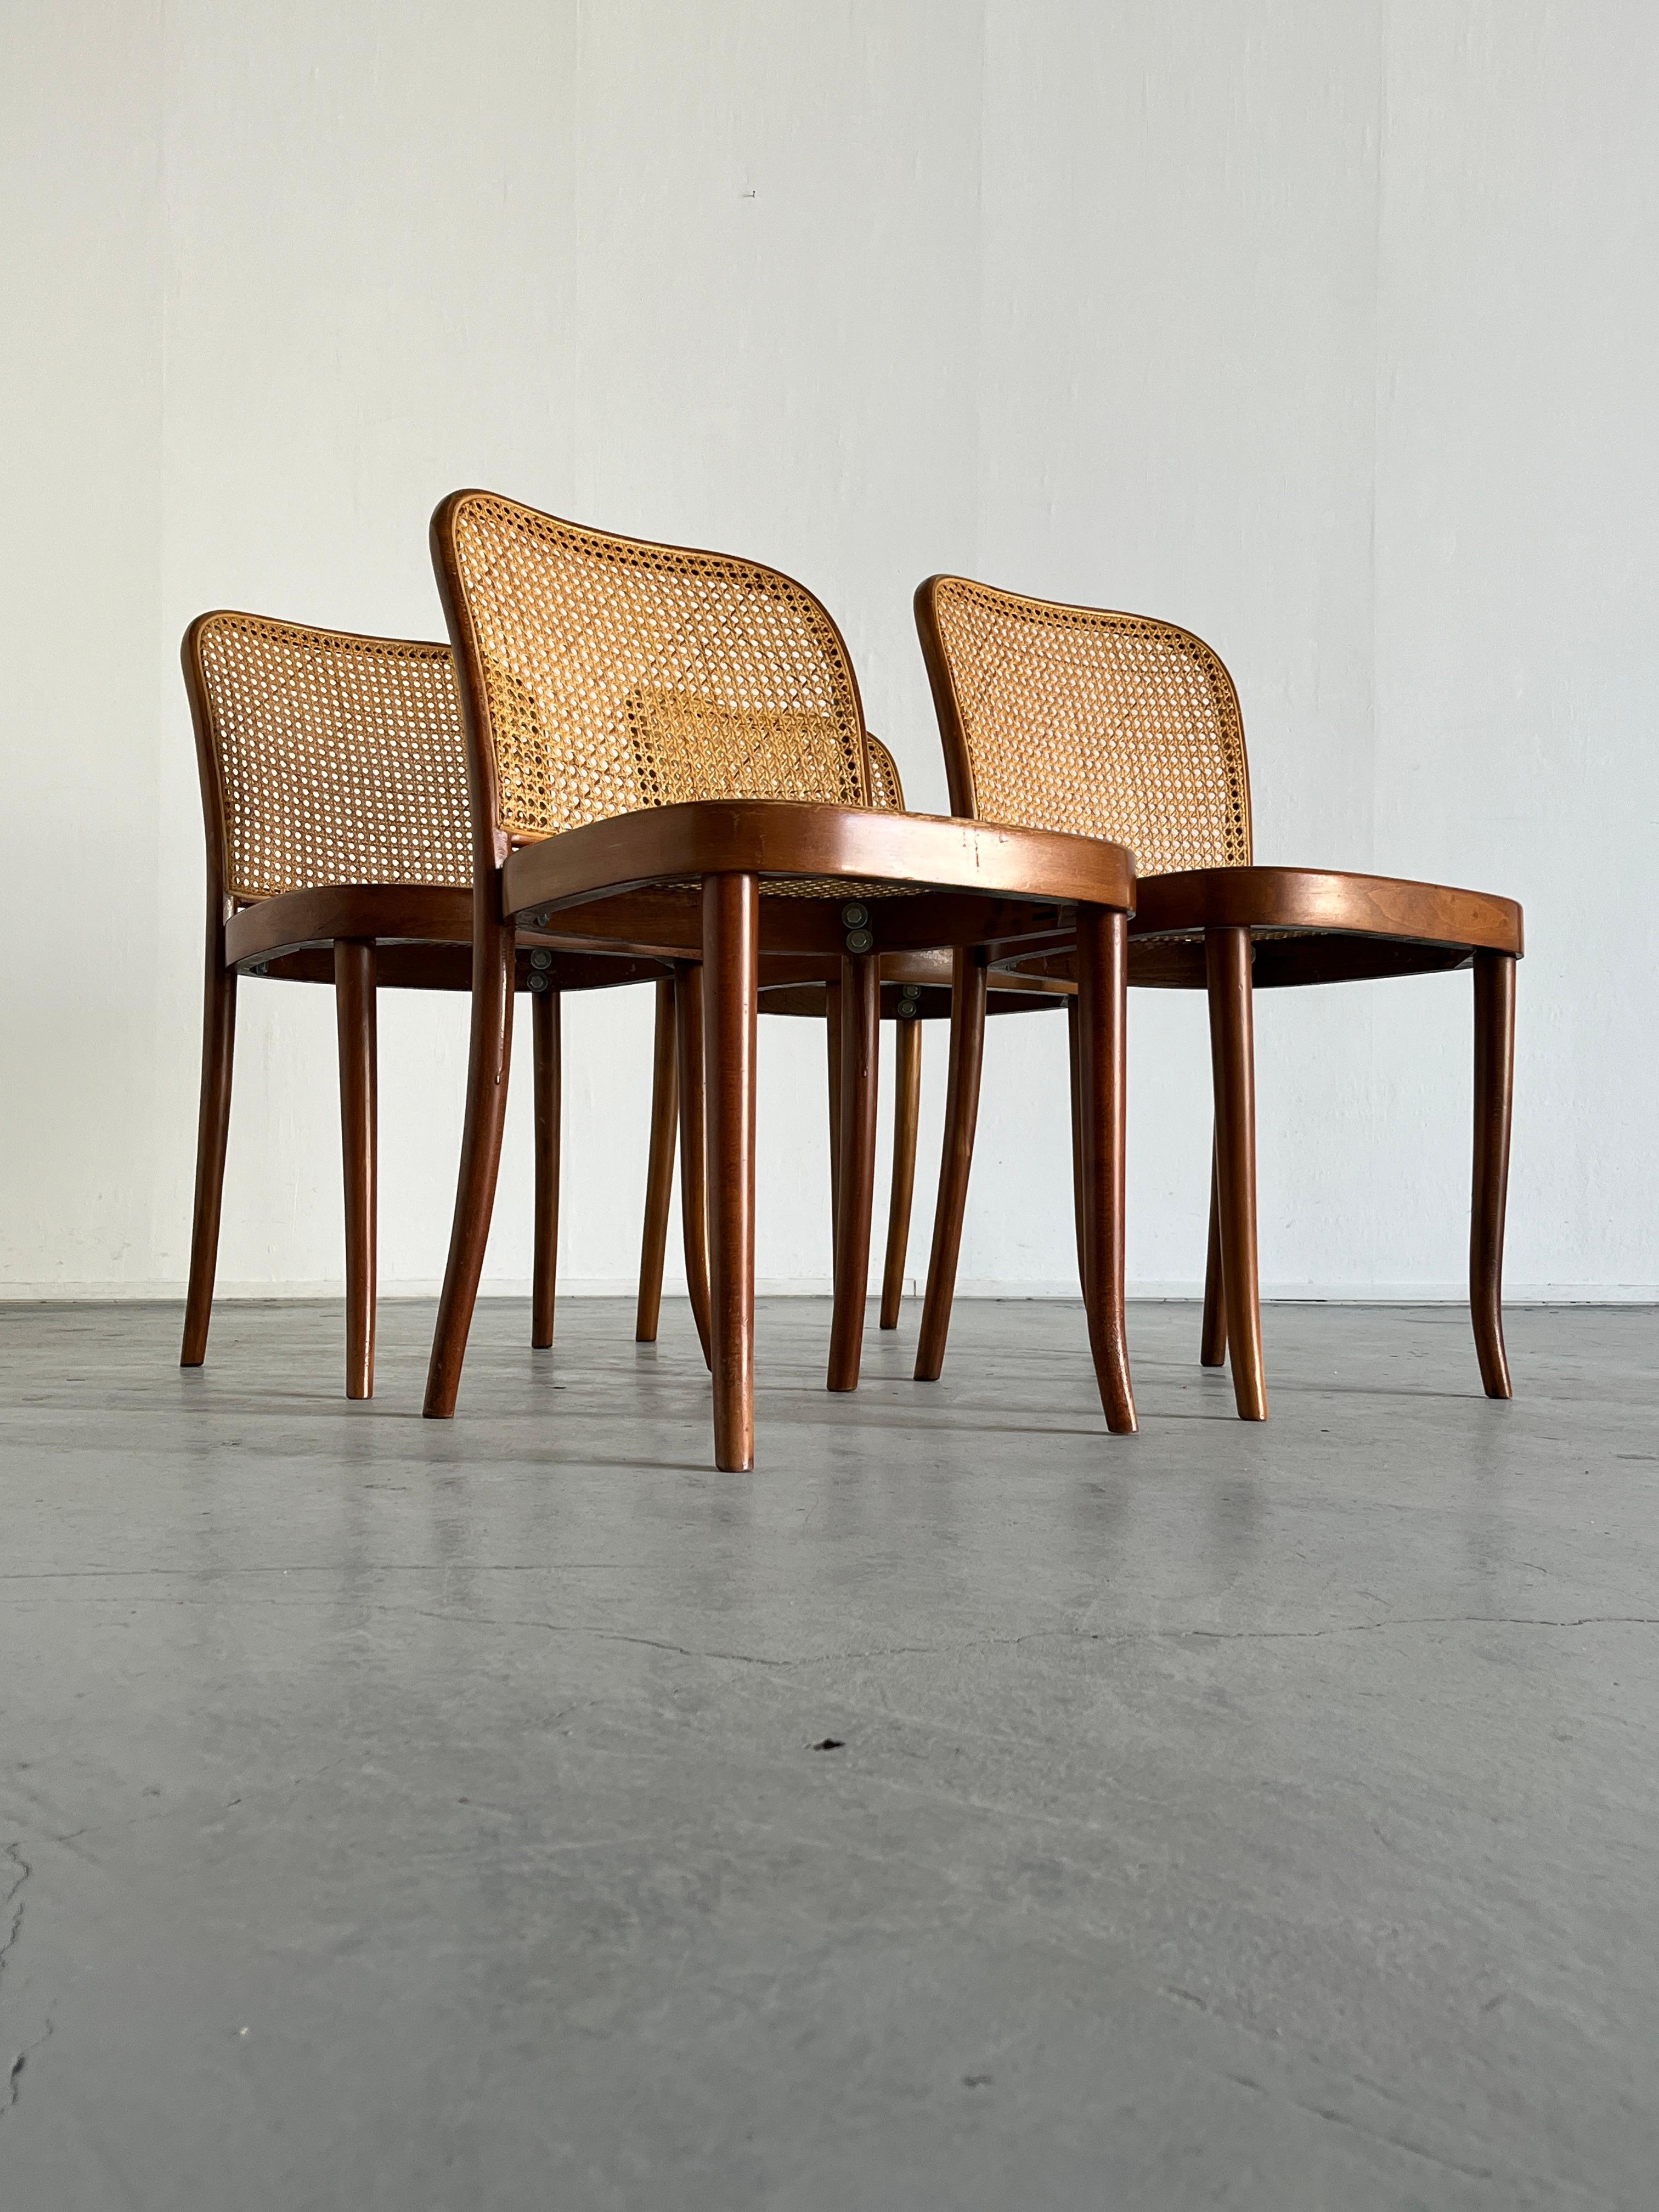 Set of 4 Vintage Thonet Bentwood No.811 Chairs, Designed by Josef Hoffman, 1970s 1